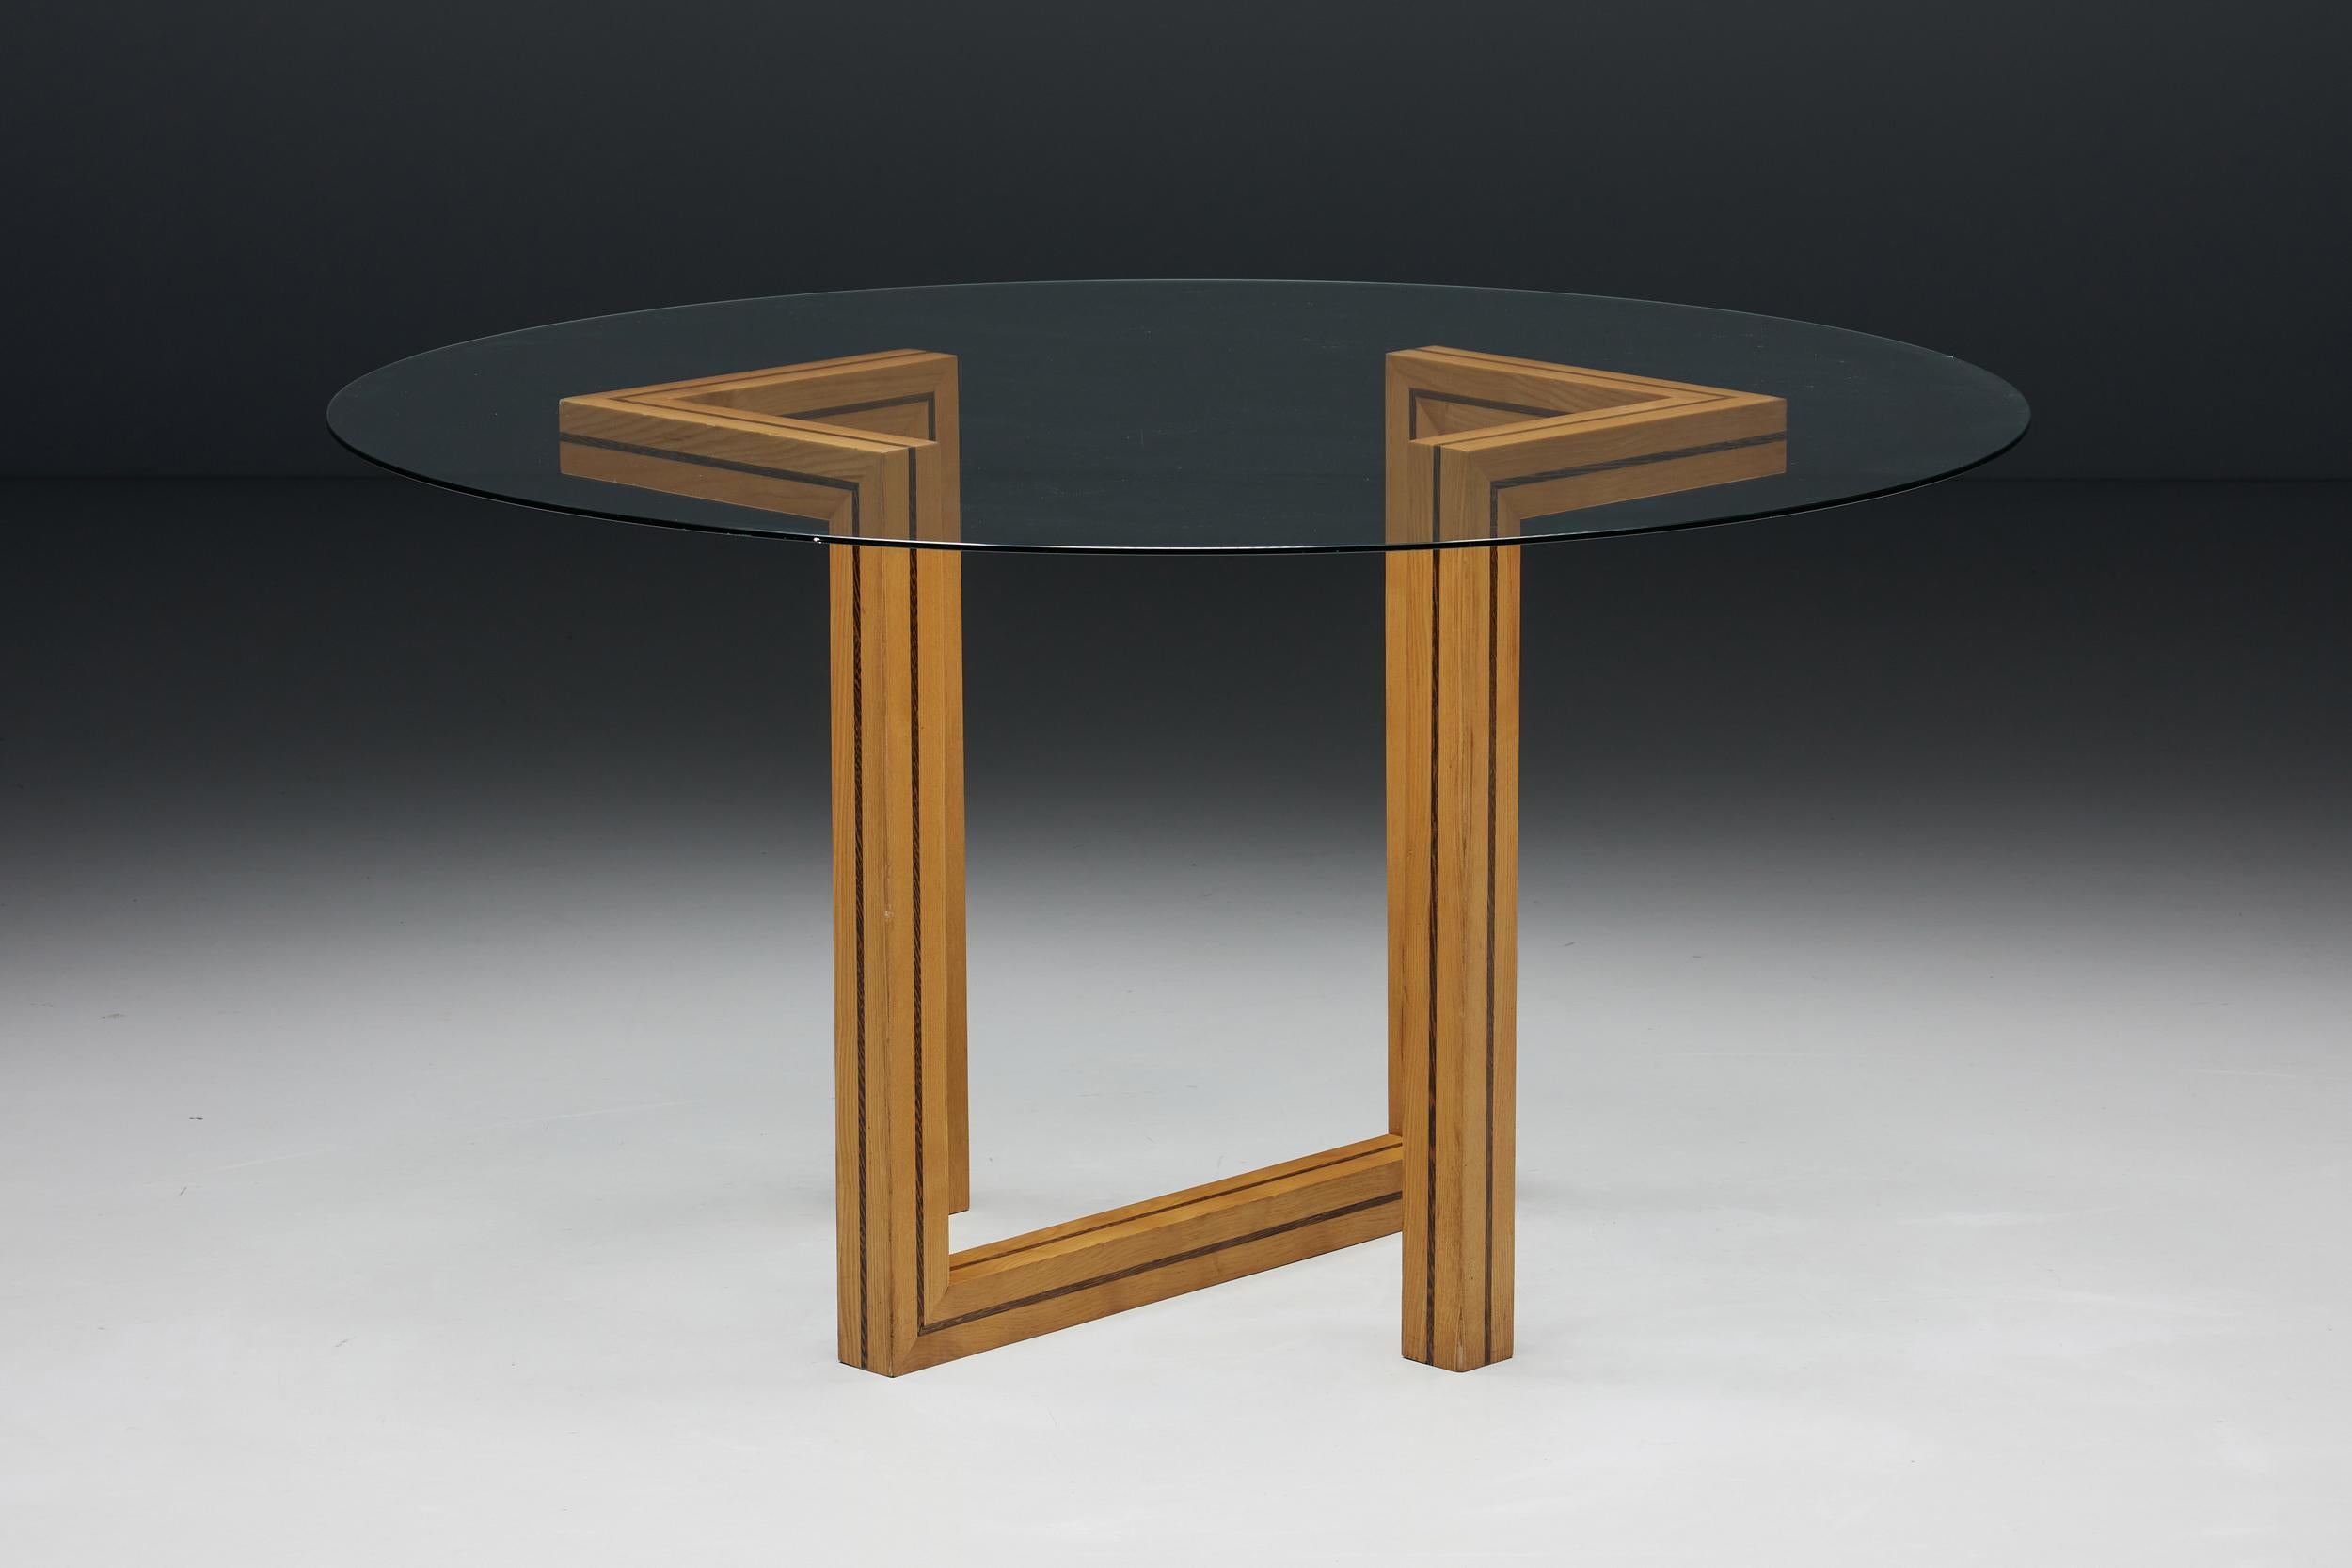 European Postmodern Round Glass Dining Table with Geometric Base, 1970s For Sale